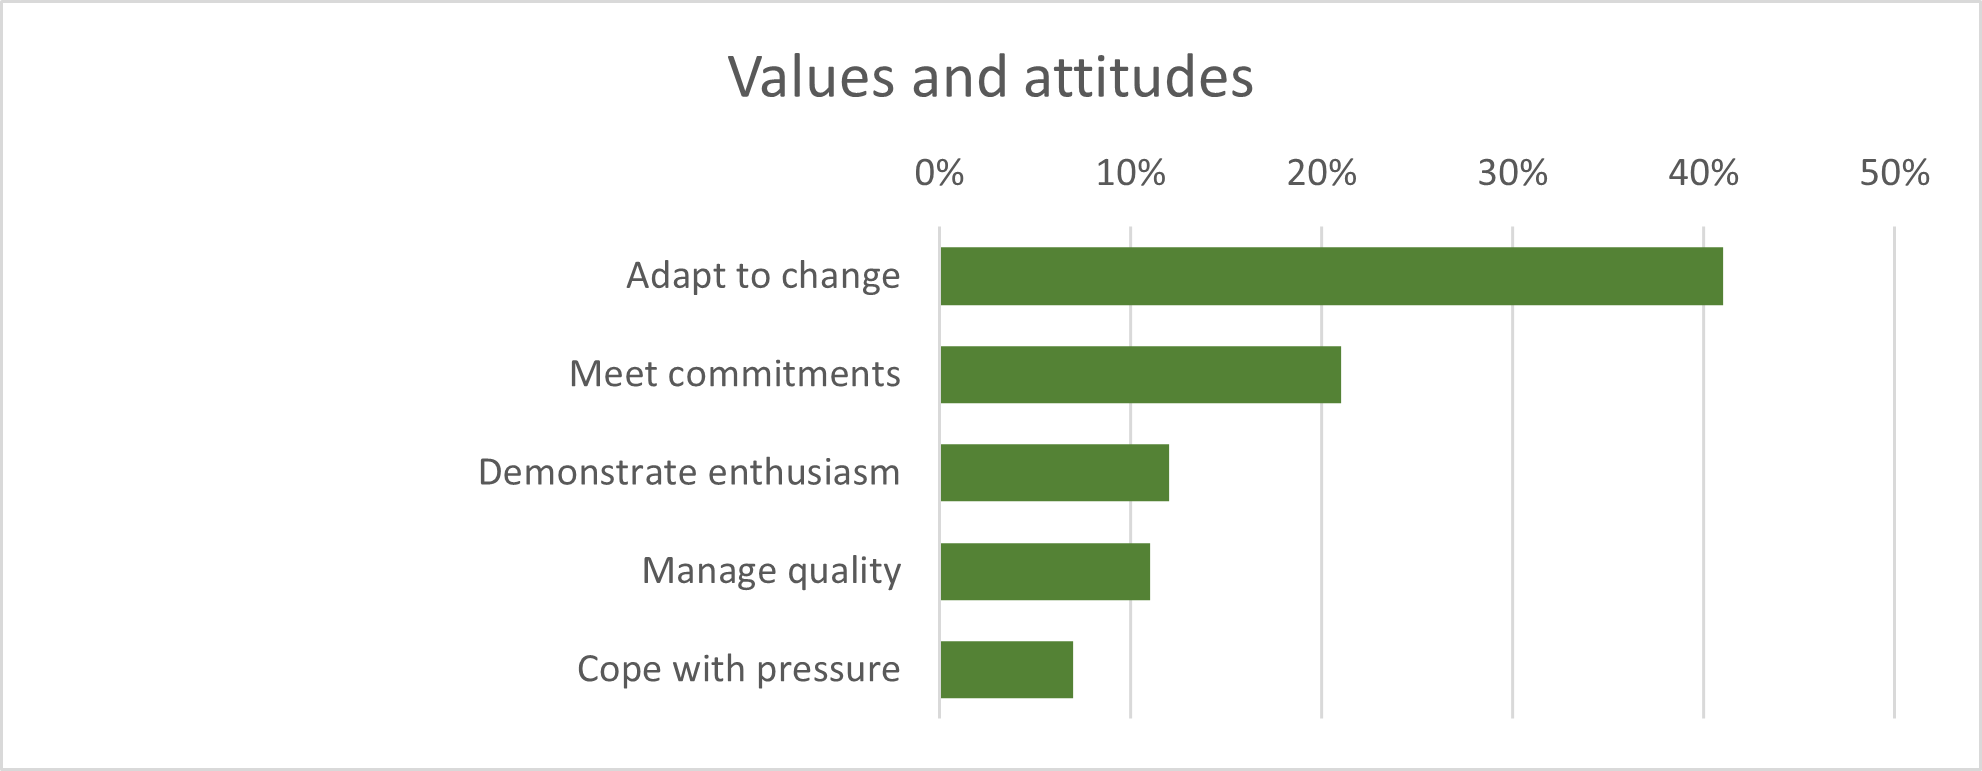 Most demanded values and attitudes